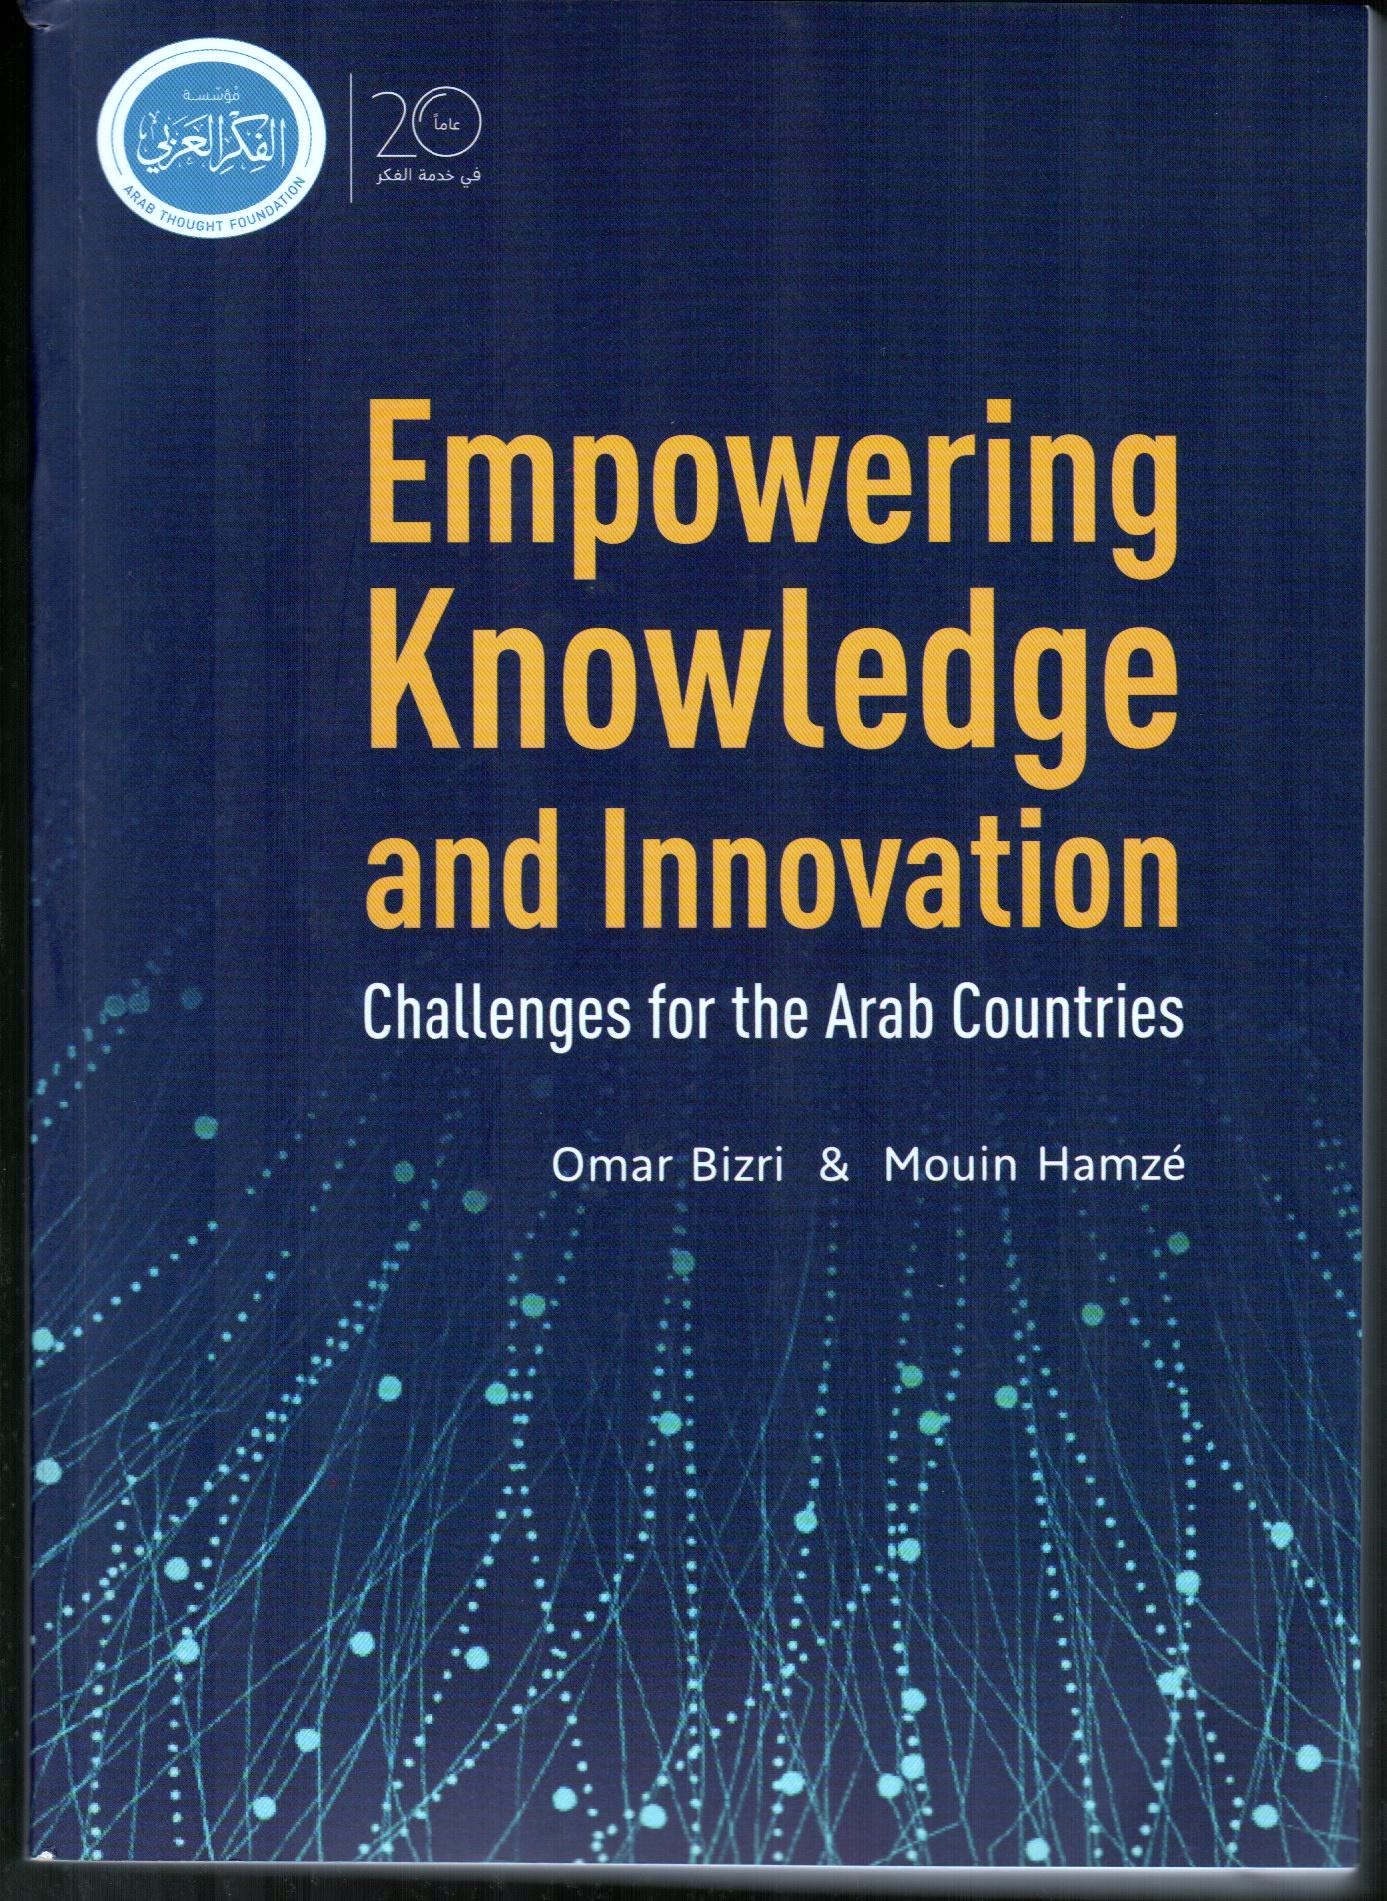 Book Review: Empowering Knowledge and Innovation.. Challenges for the Arab Countries